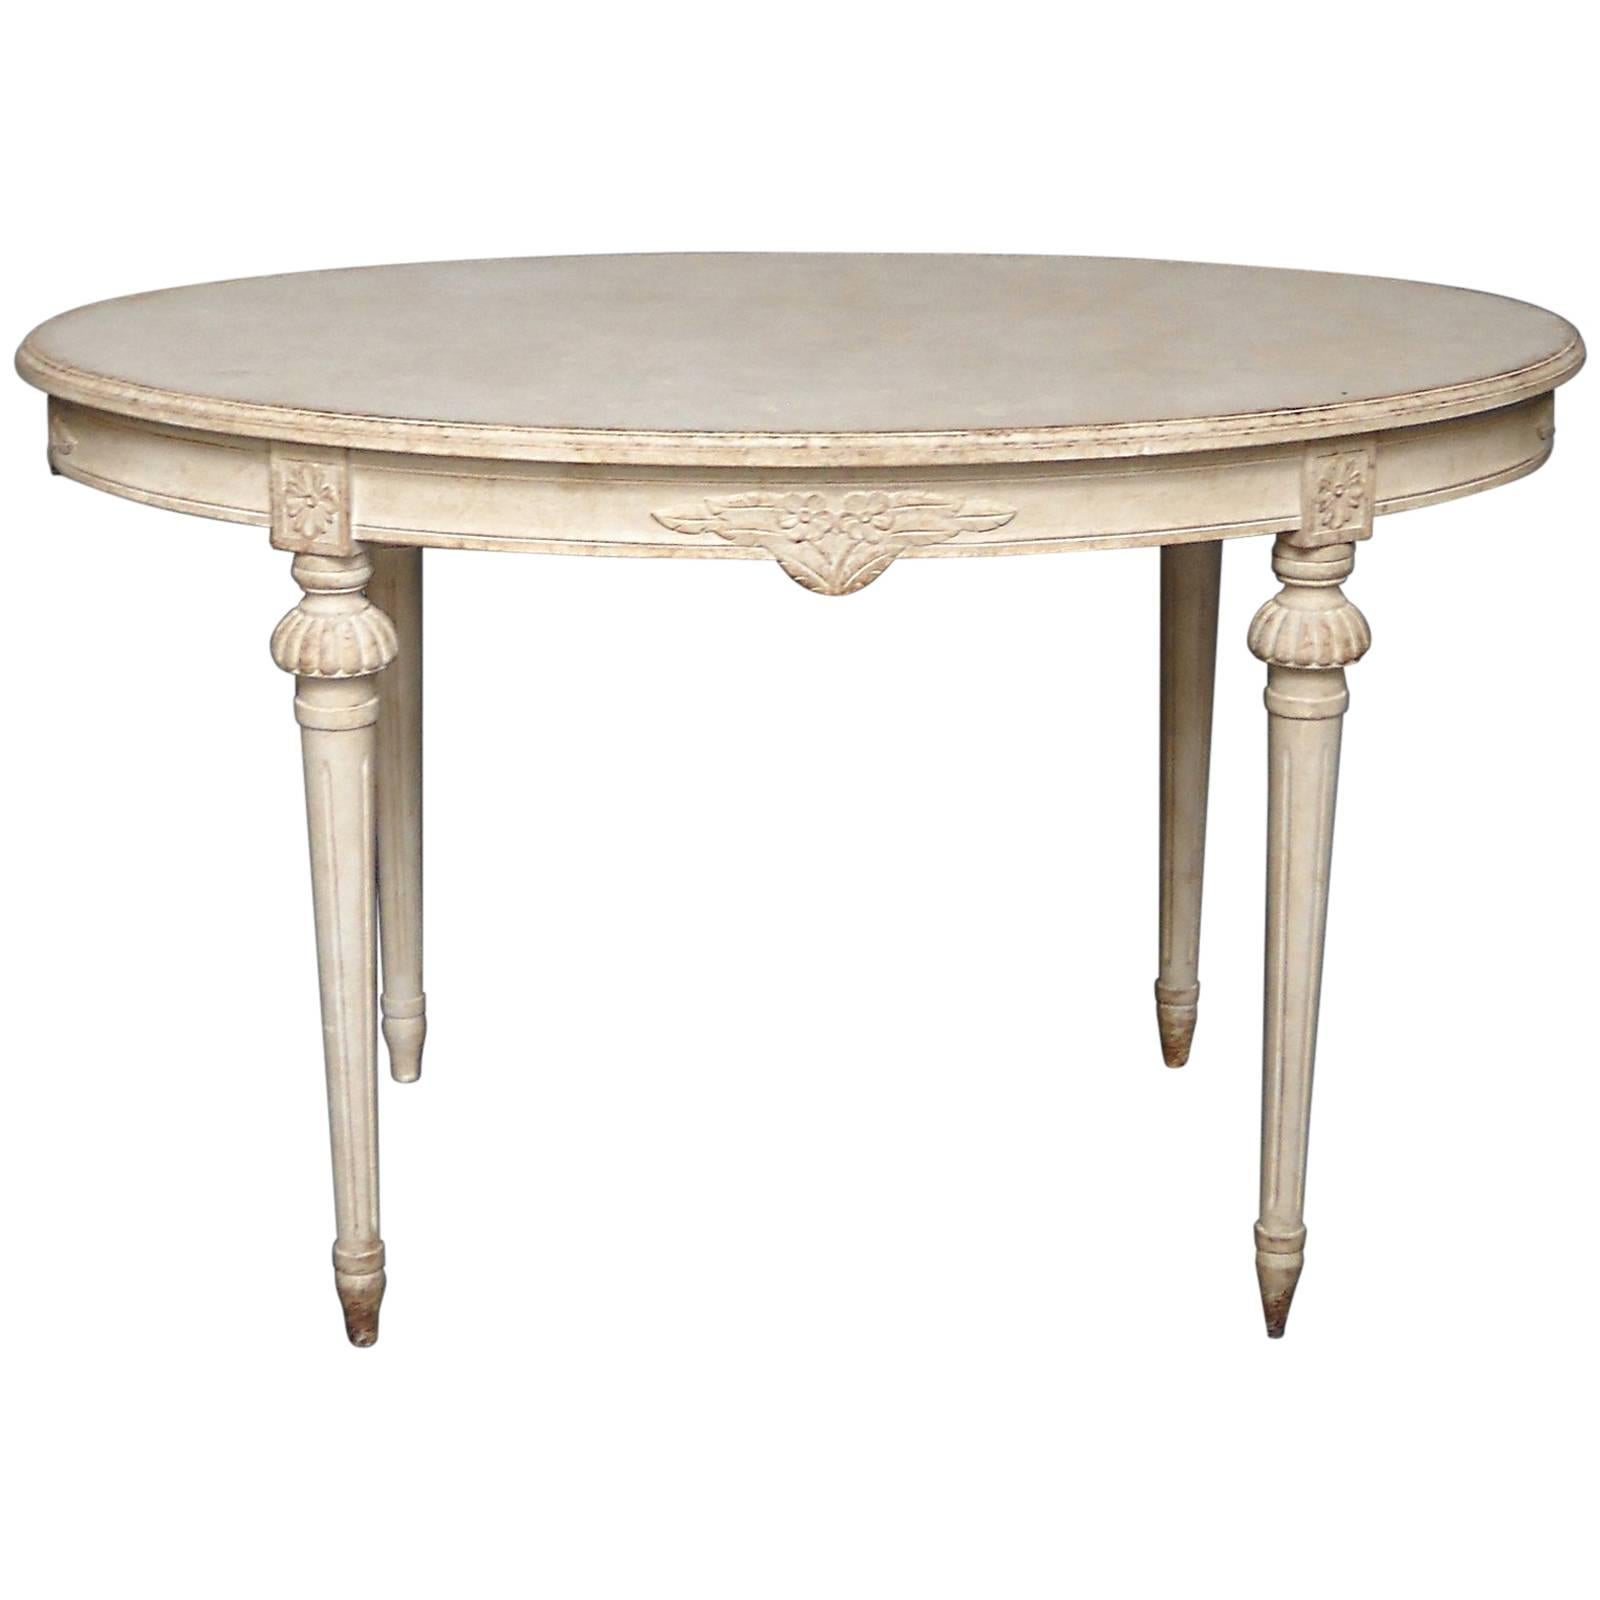 Gustavian Style Table with Floral Carving